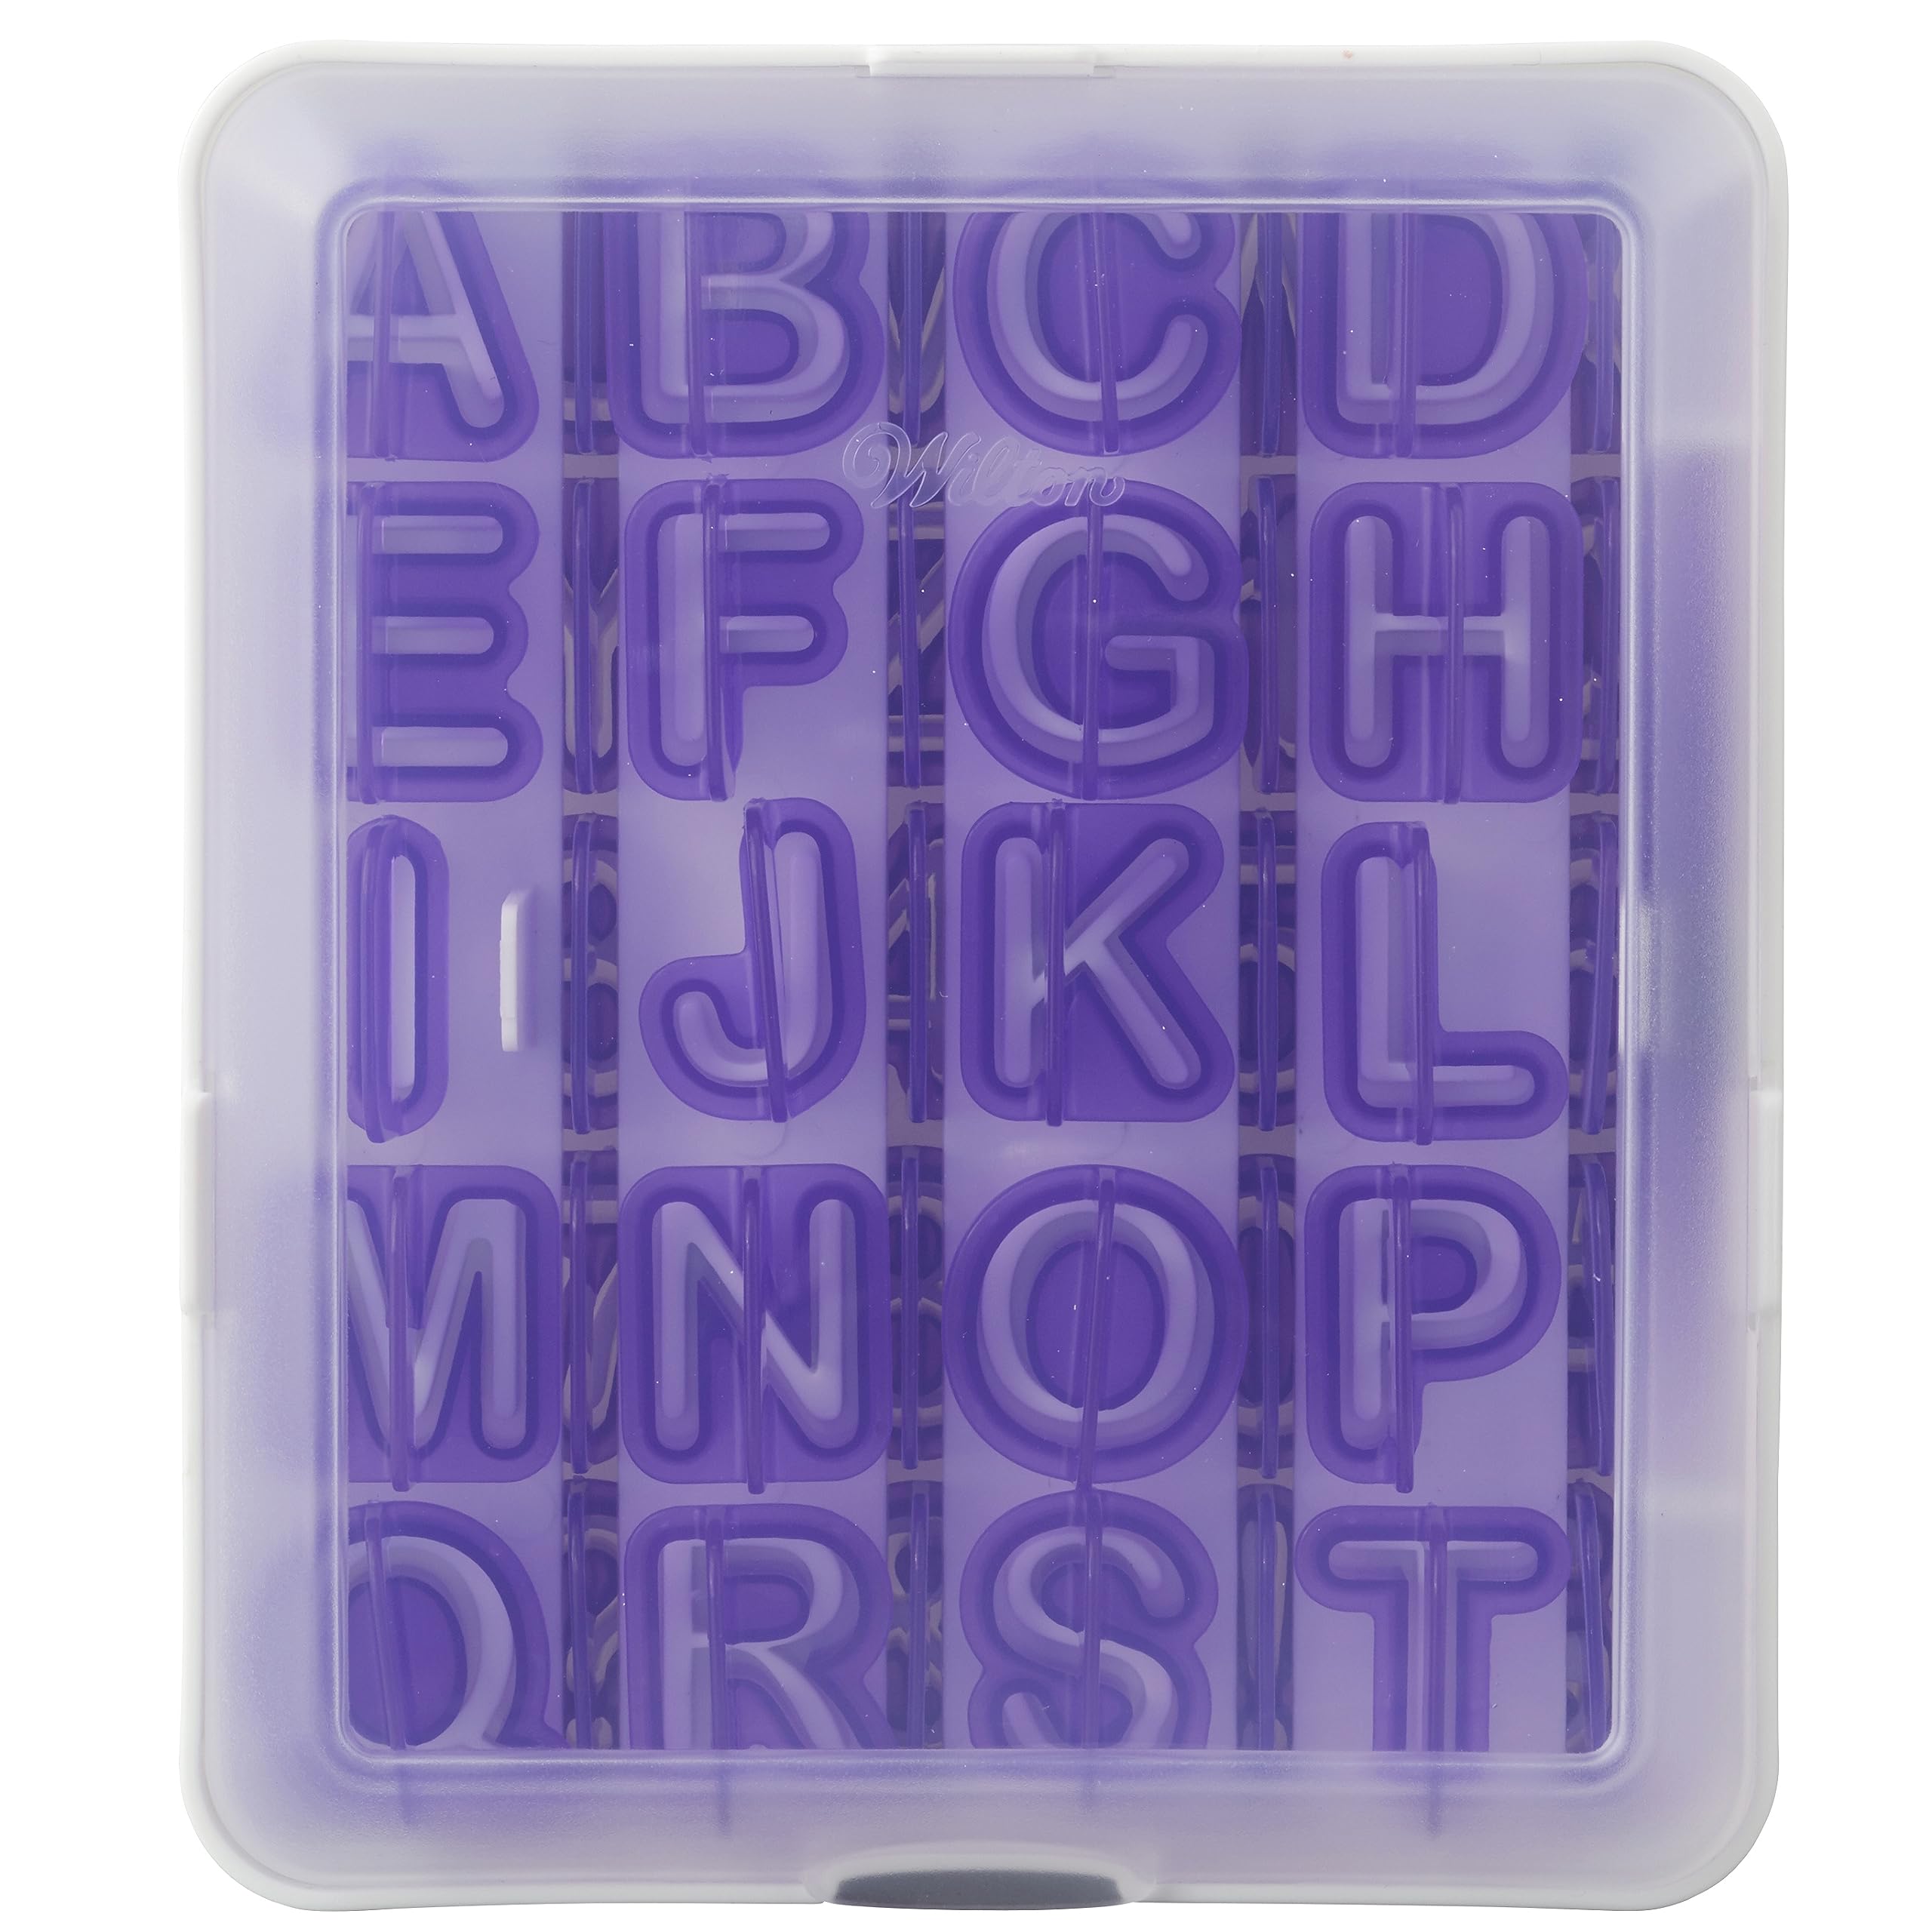 Wilton Fondant Letter and Number Stamp Set - Small Plastic Fondant Cutters Make It Easy to Press Out Shapes to Personalize Your Treats with Letters and Numbers, 42-Piece